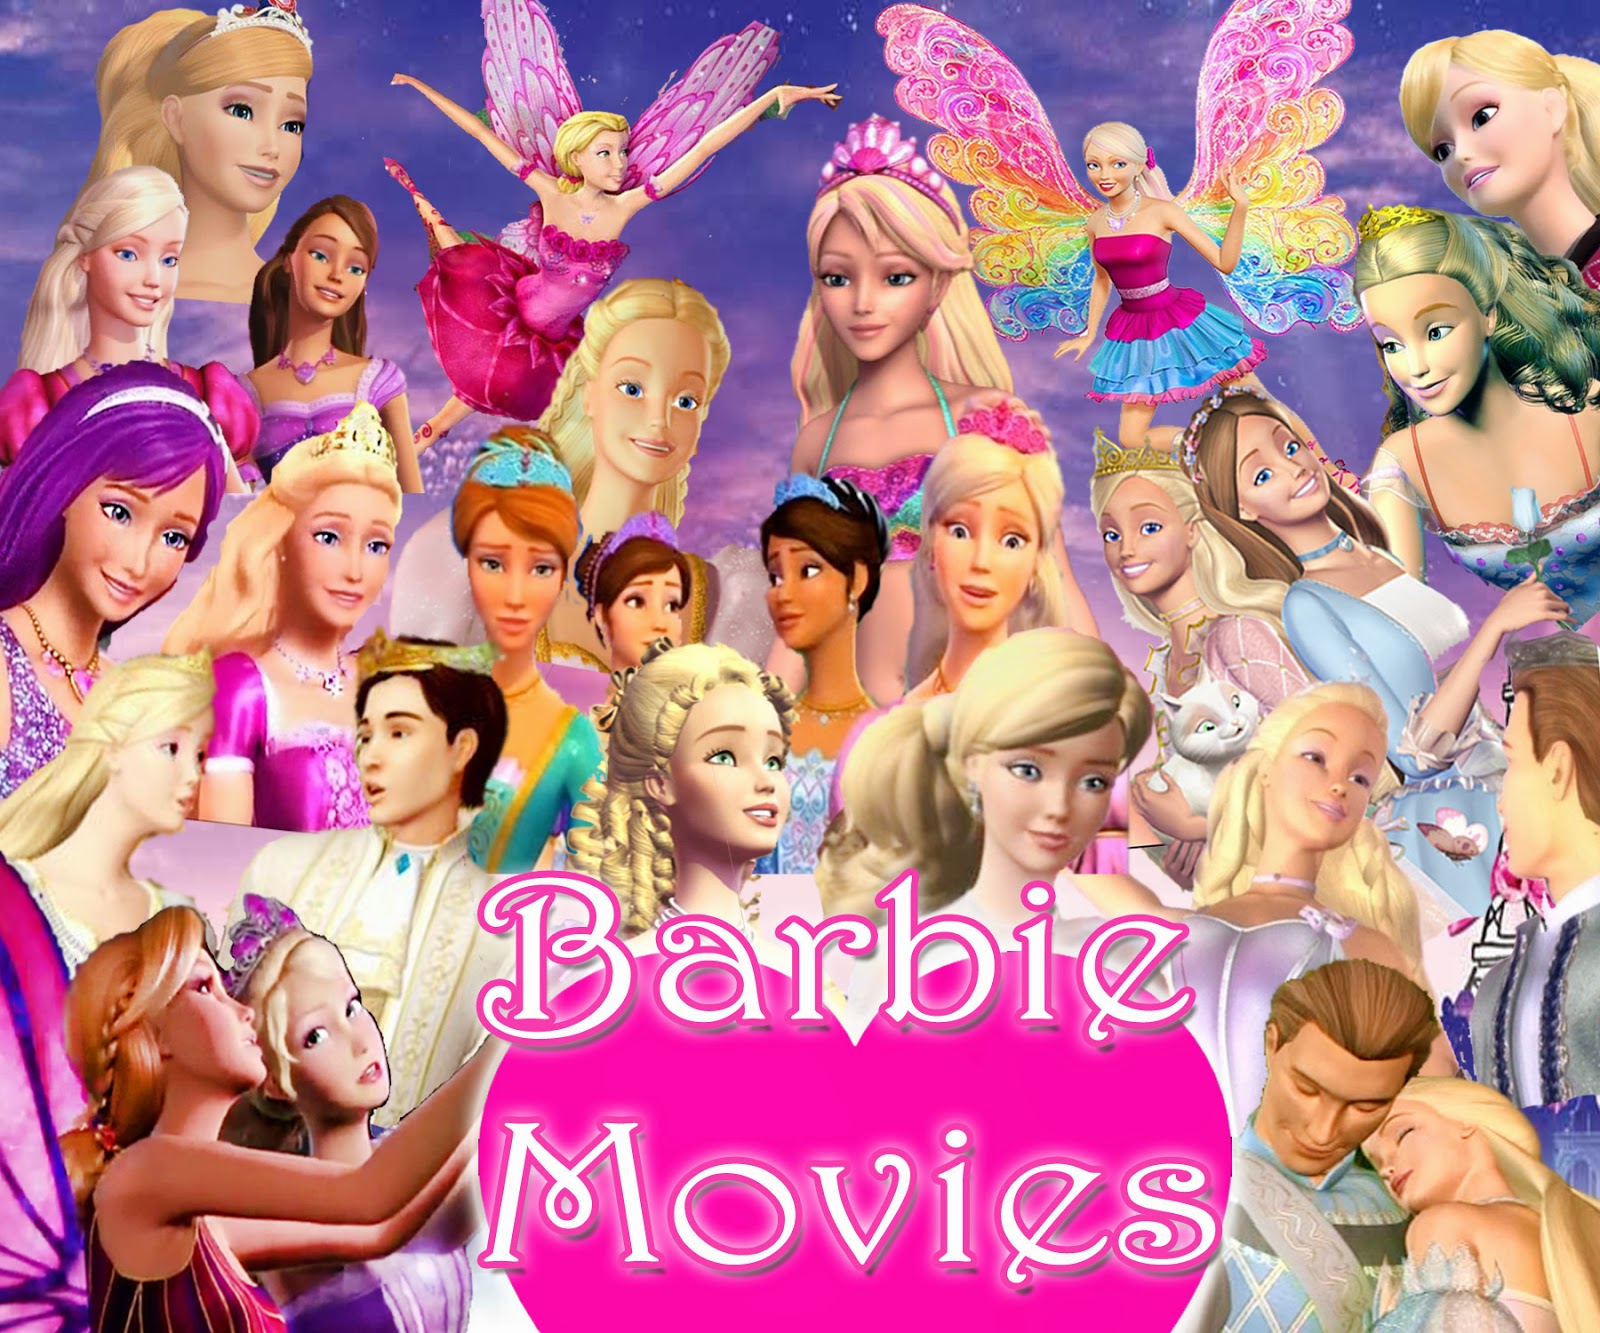 List of All Free Barbie Movies Watch OnlineWatch Barbie Online Movies